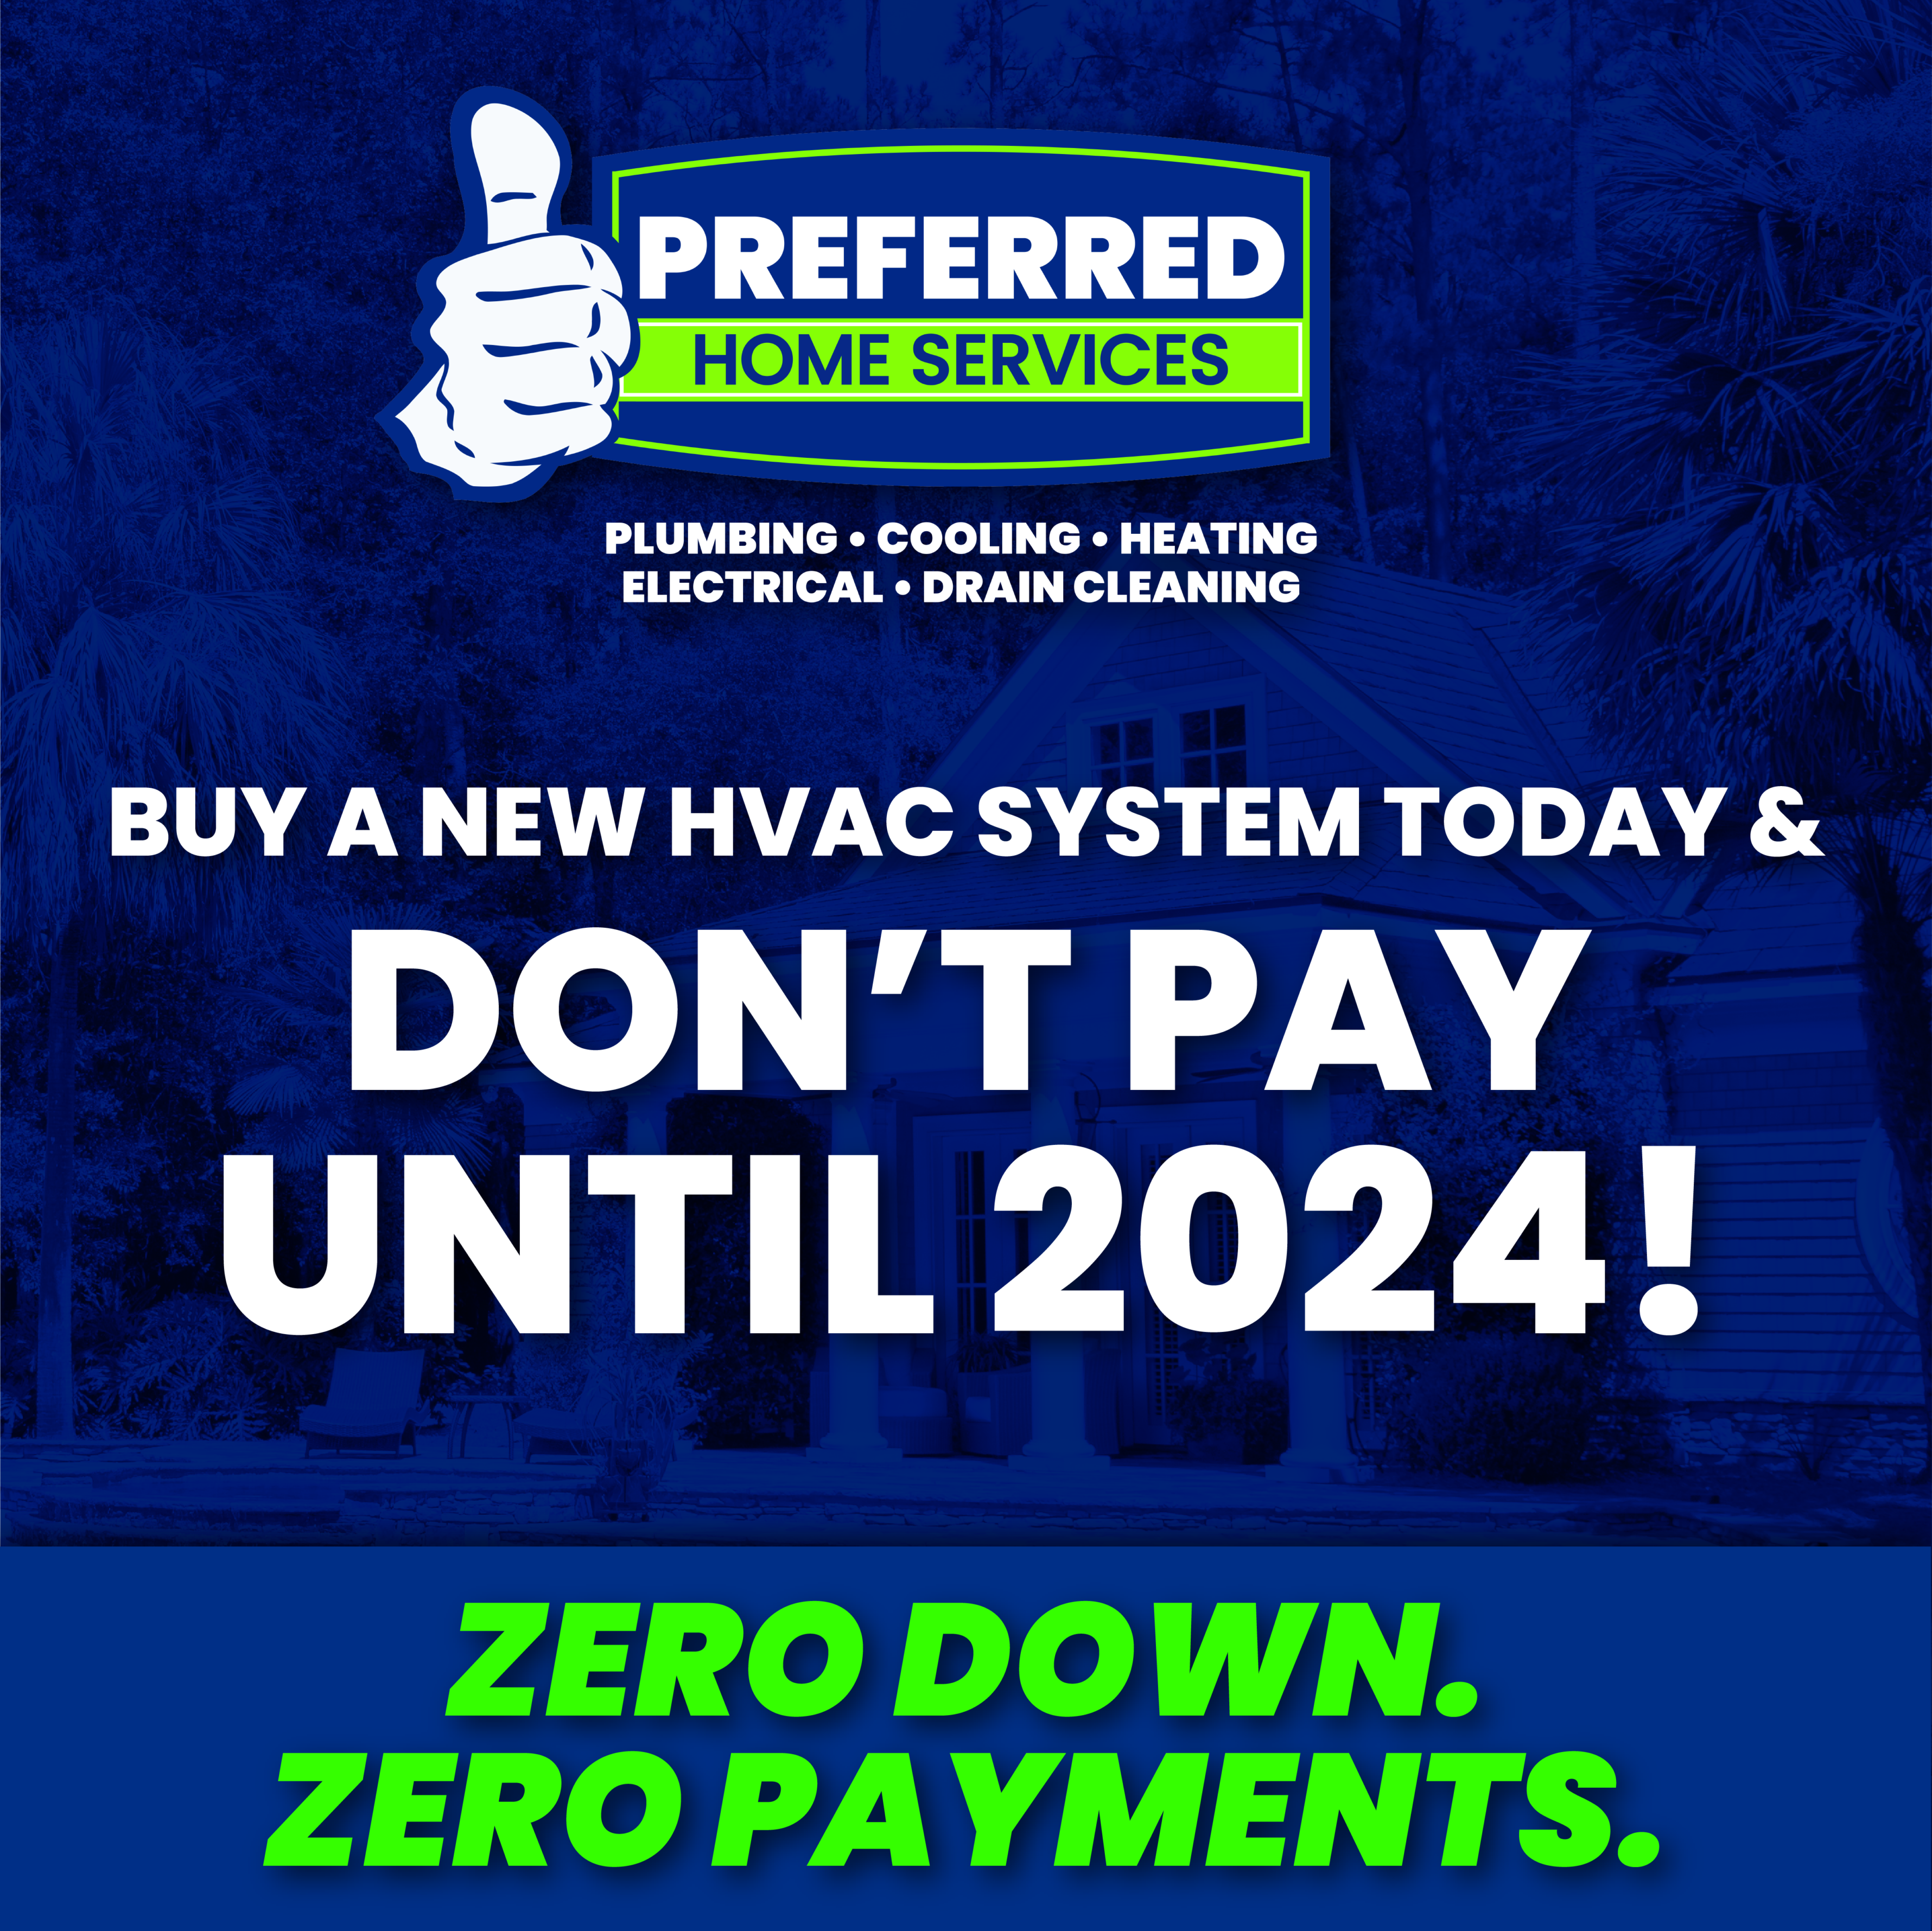 New HVAC System - Don't Pay Until 2024 - Zero Down, Zero Payments